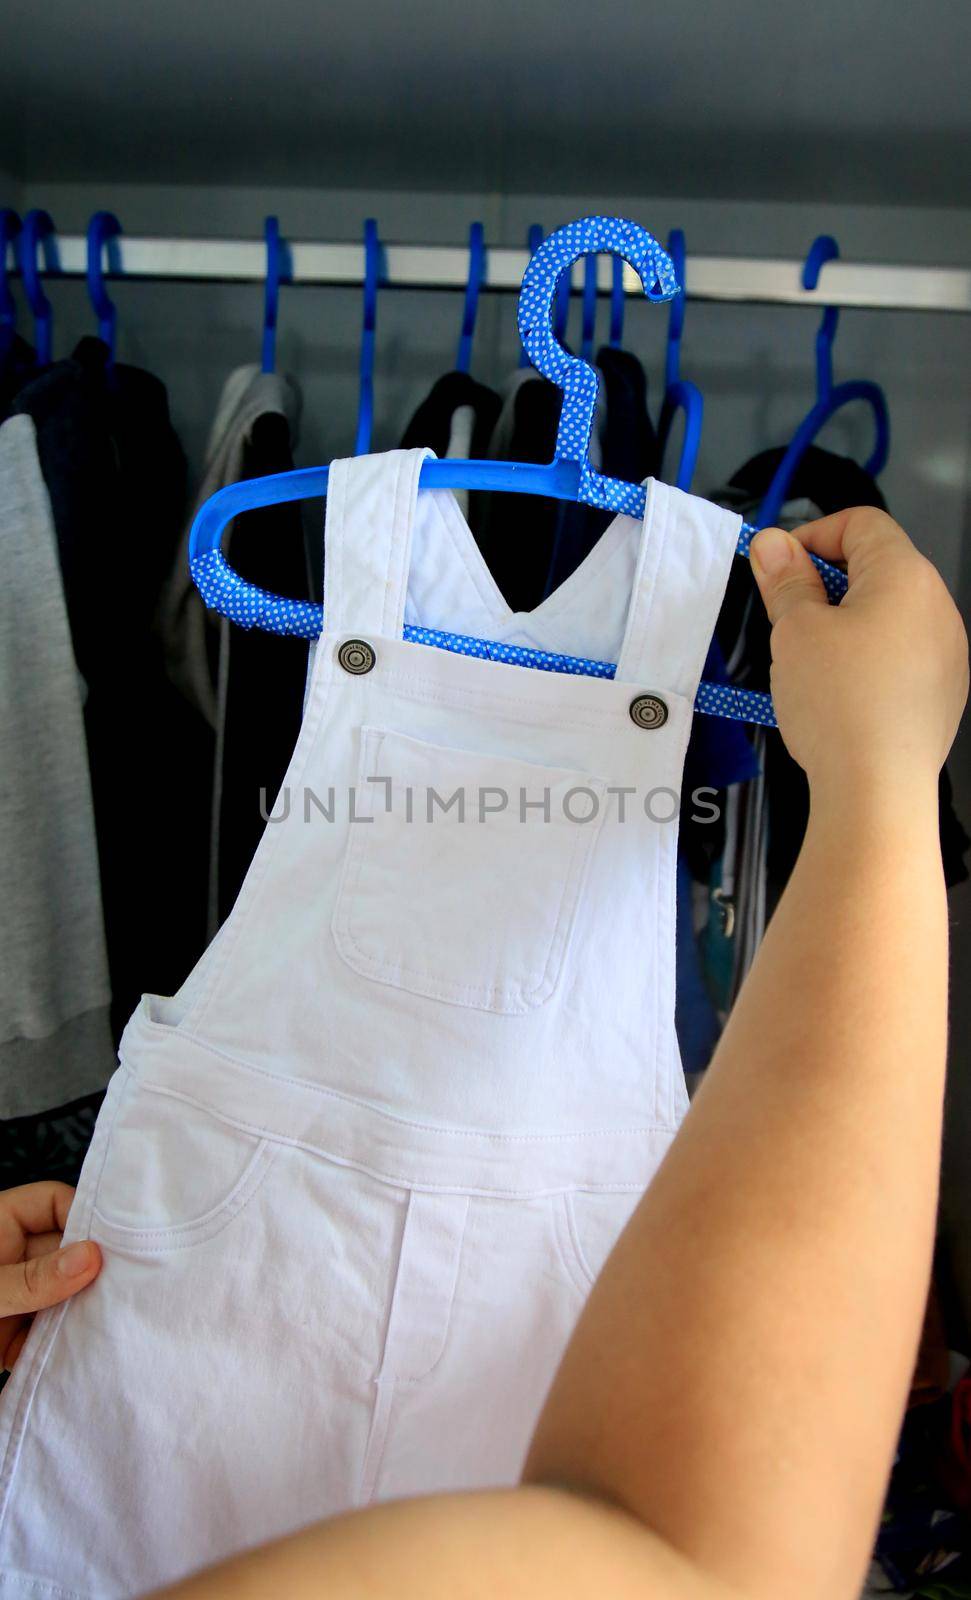 salvador, bahia / brazil - may 7, 2020: hands are seen picking up children's clothes on a hanger.